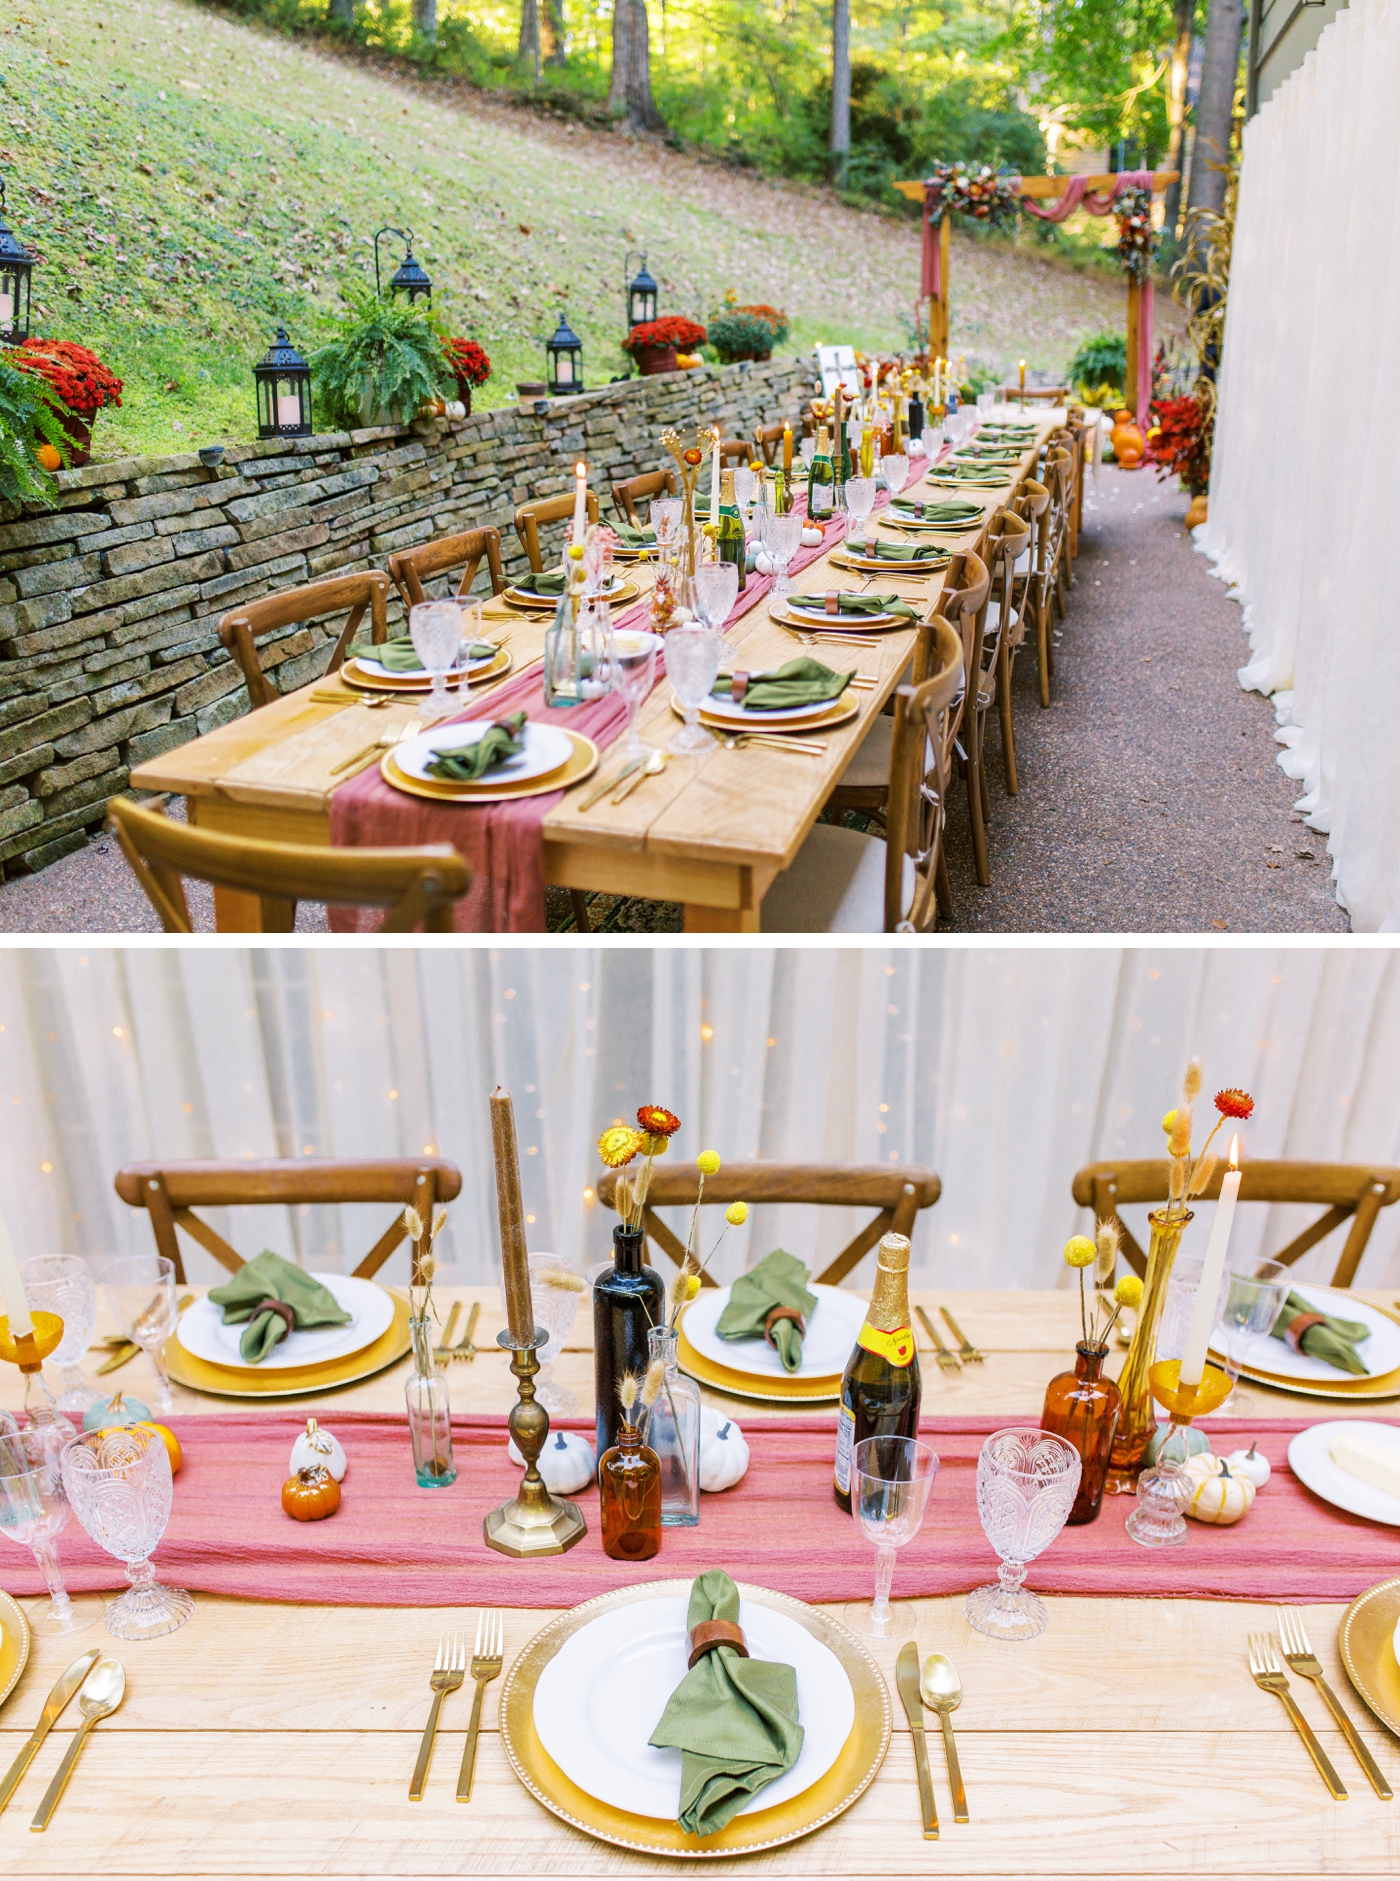 Farm tables lined with dusty burgundy fabric and tapered candles